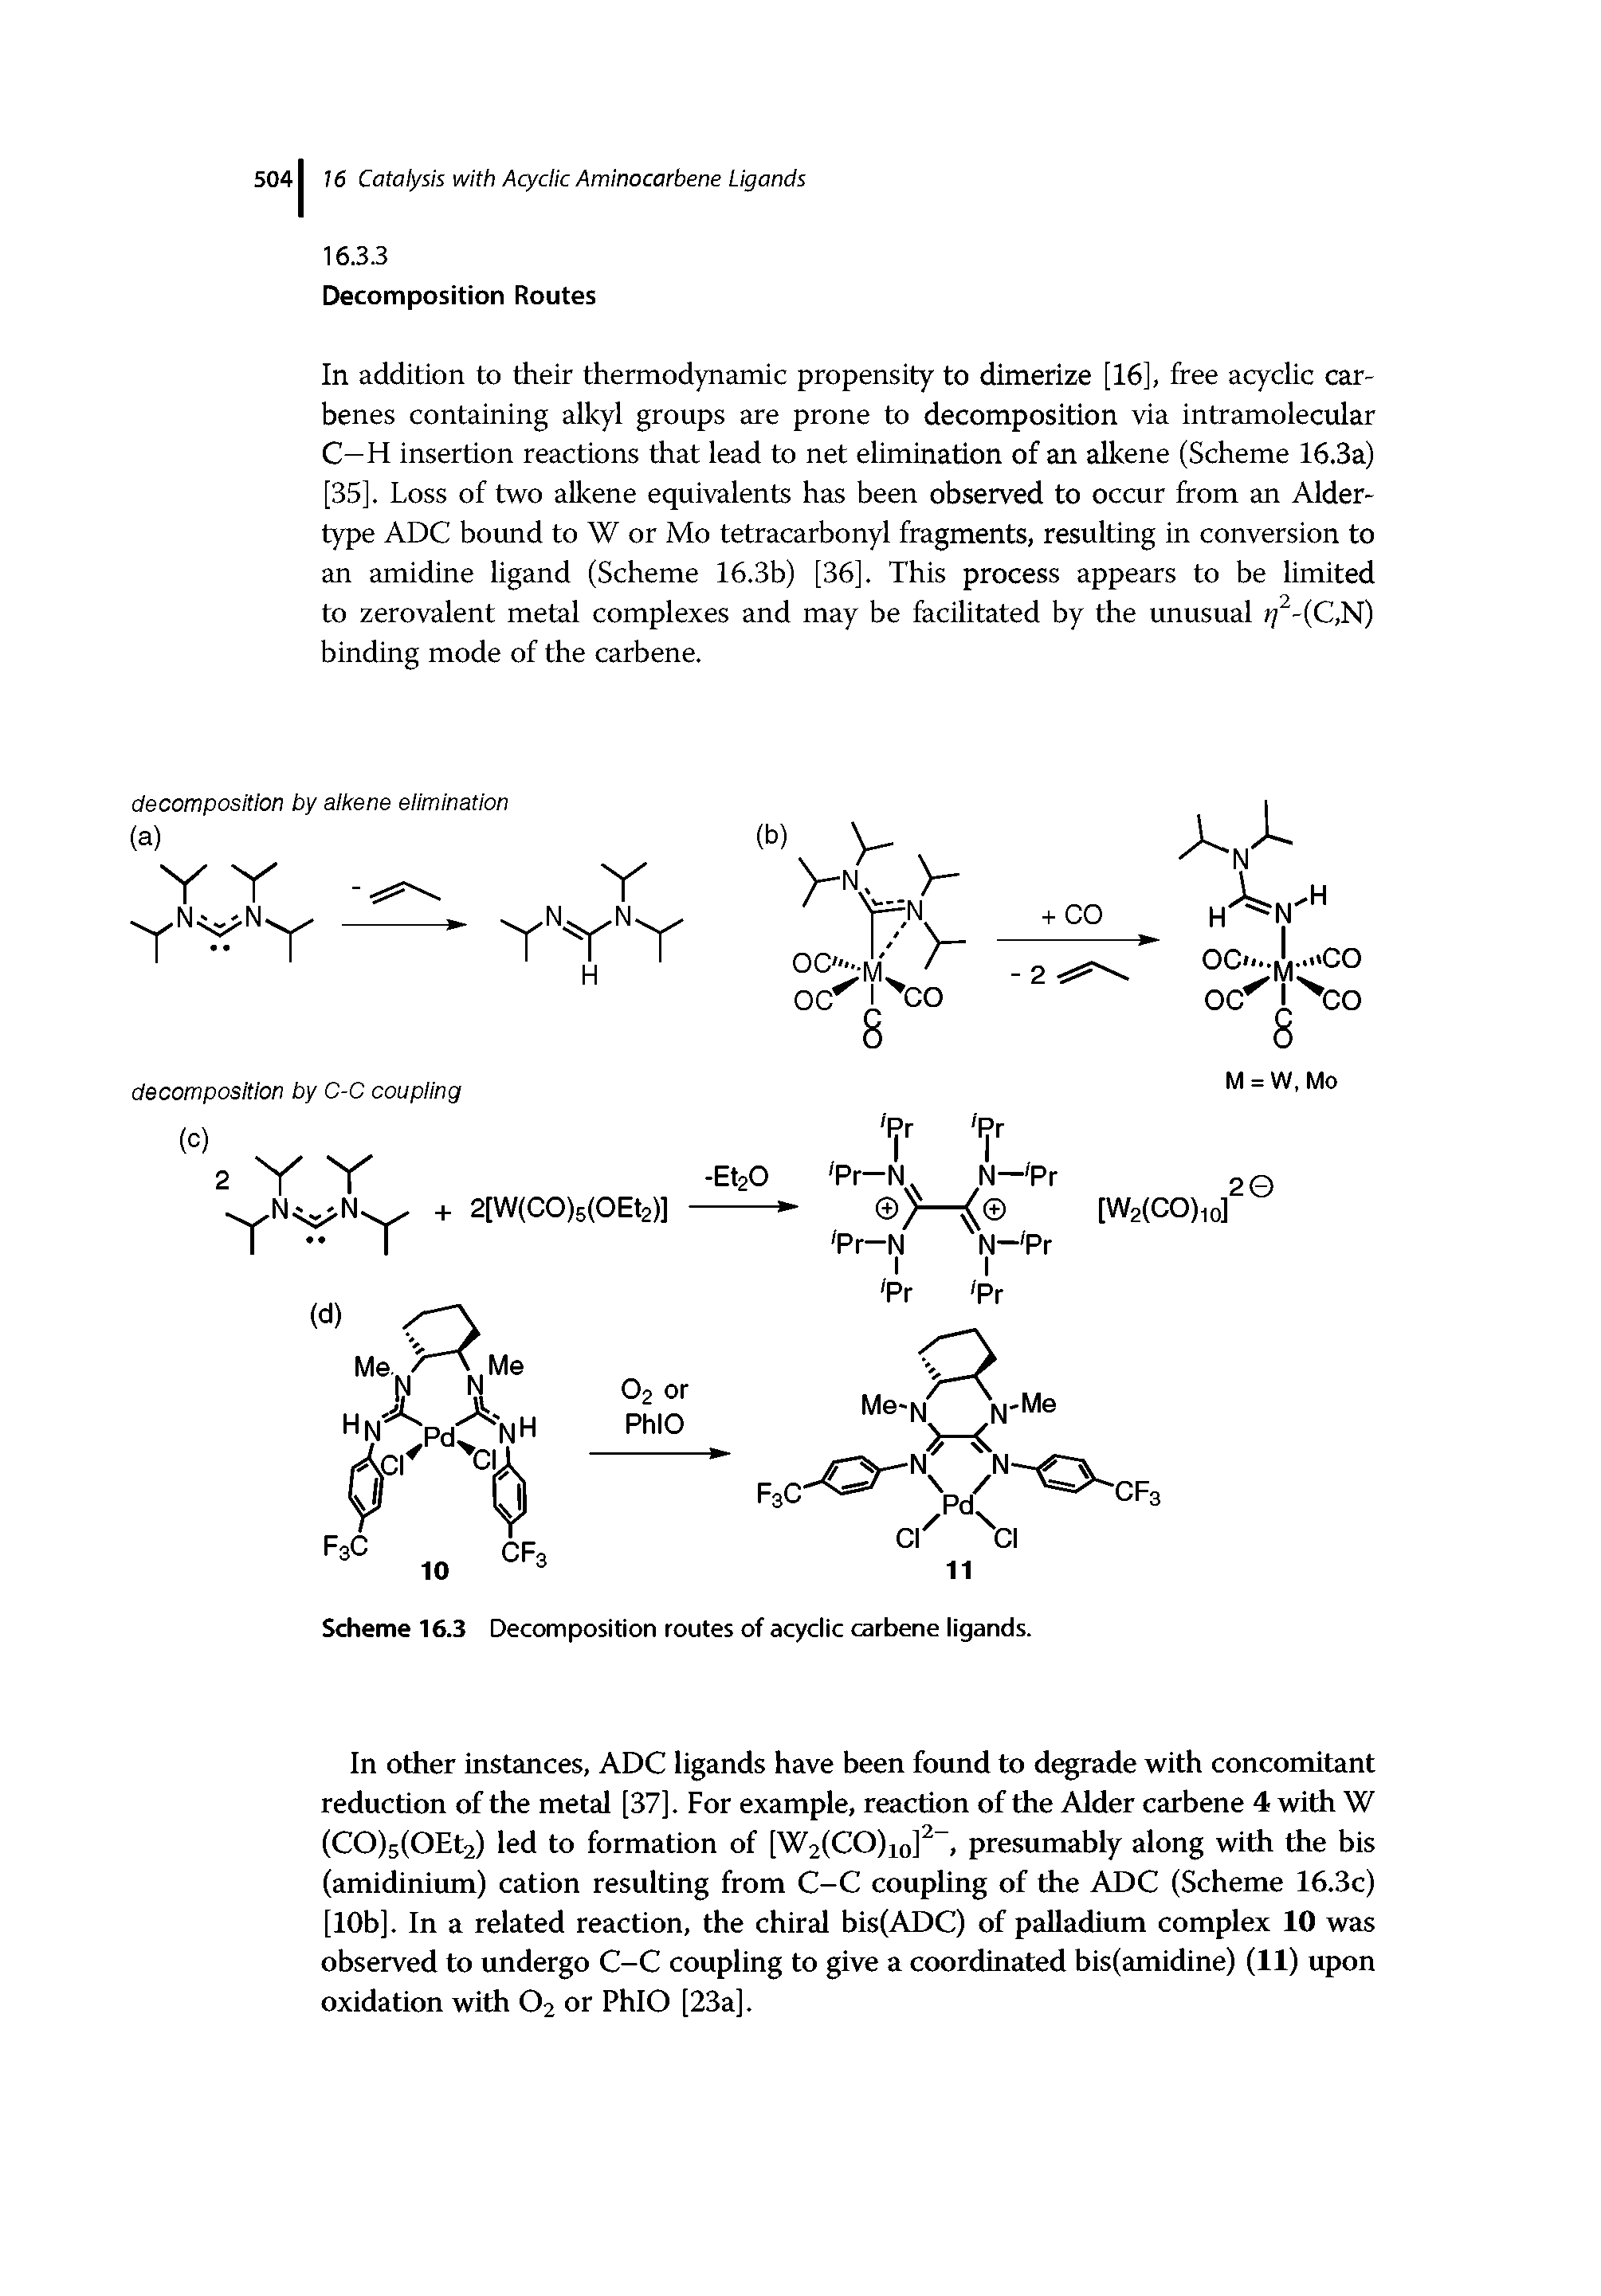 Scheme 16.3 Decomposition routes of acyclic carbene ligands.